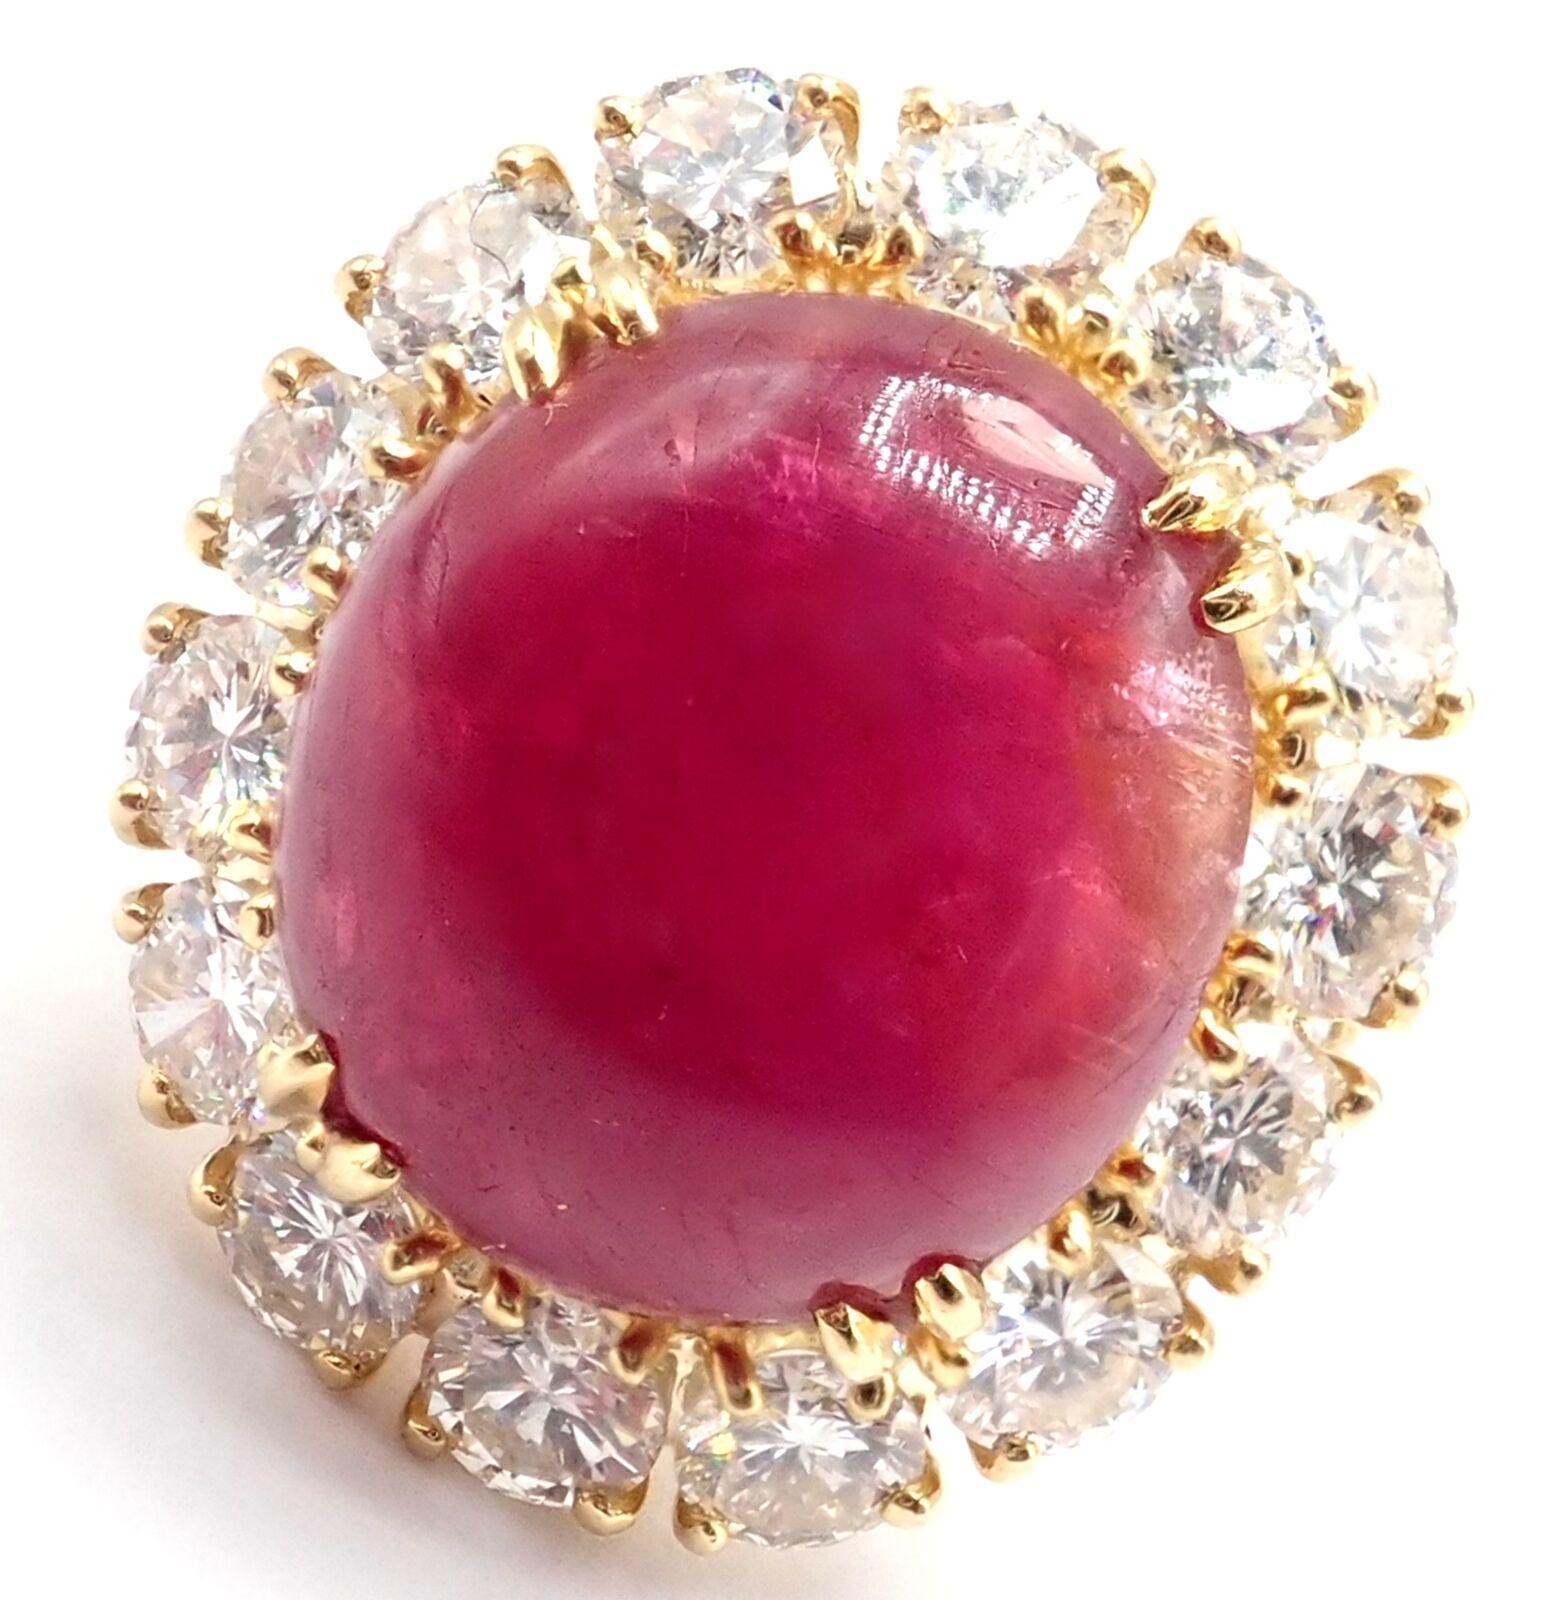 18k Yellow Gold Large 11ct Cabochon Ruby and Diamond Ring by Van Cleef & Arpels. 
With 20 round brilliant cut diamonds, VVS1 Clarity, E Color. Total Diamond Weight approximately 3ct
Oval Cabochon Run total weight approximately 11ct
Details: 
Ring